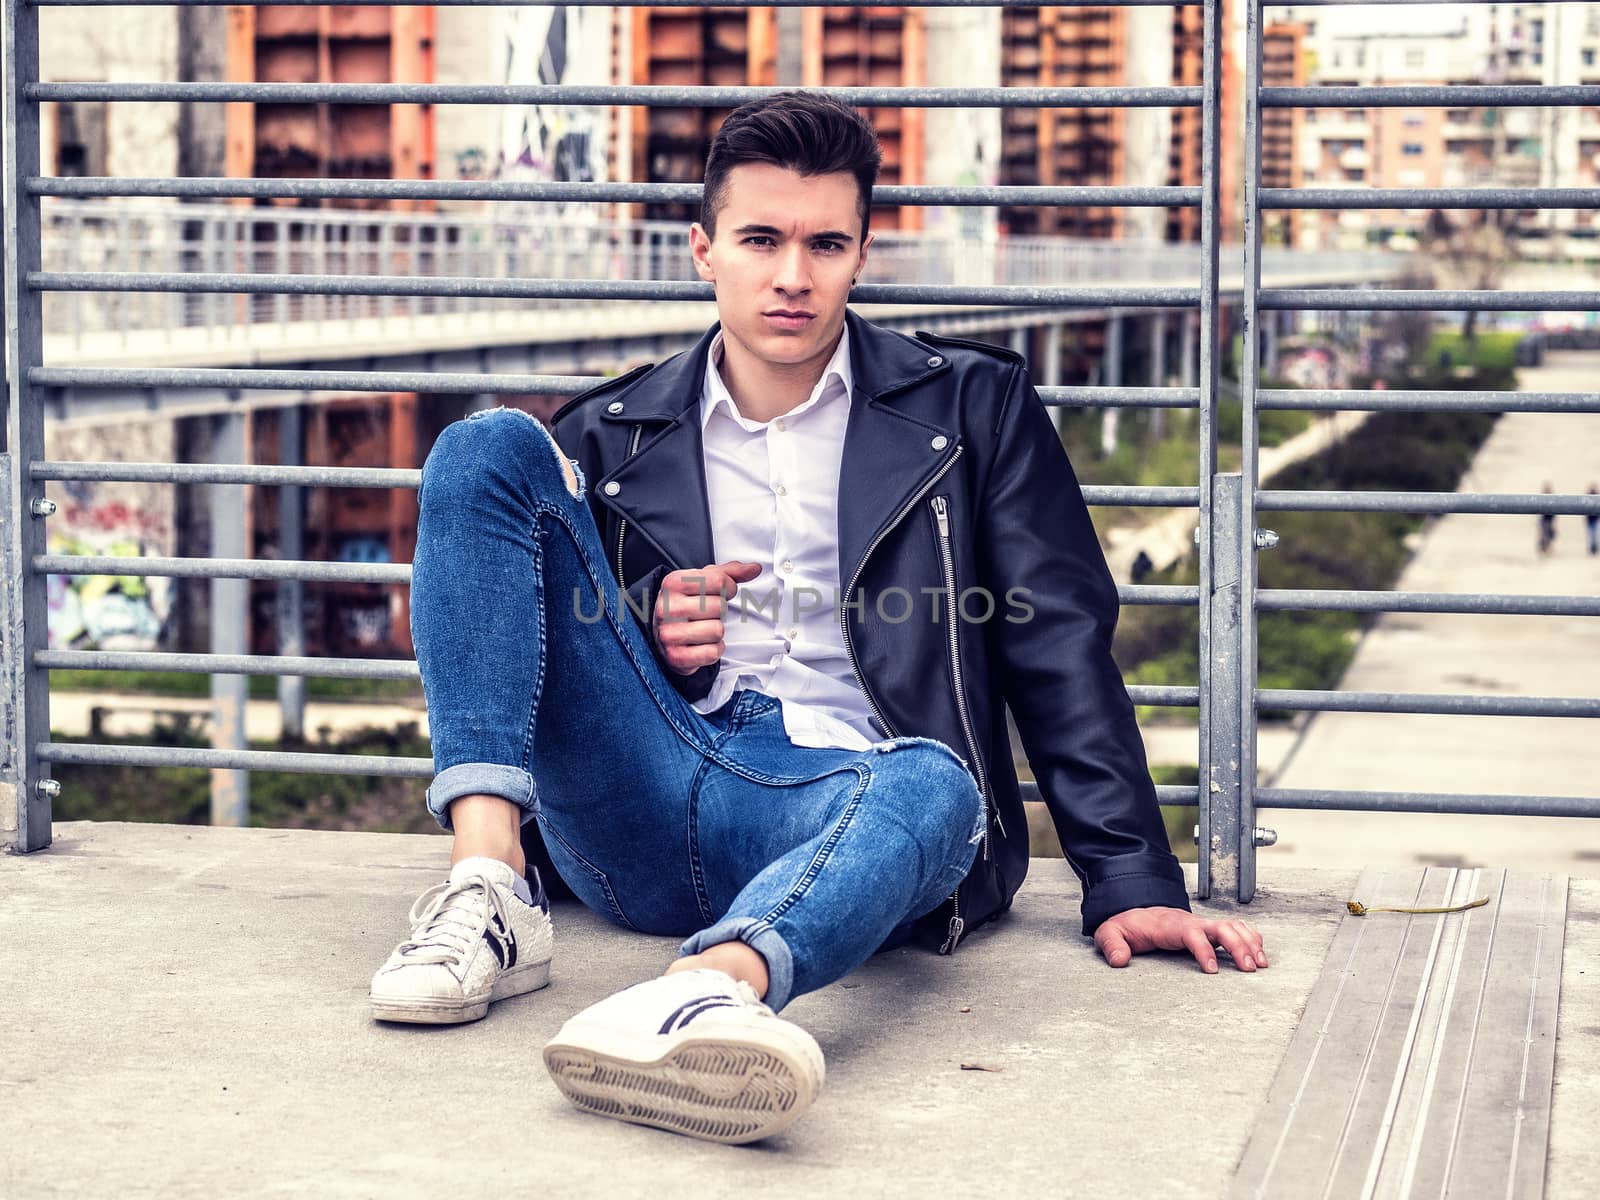 One handsome young man in urban setting in European city, sitting, wearing black leather jacket and jeans